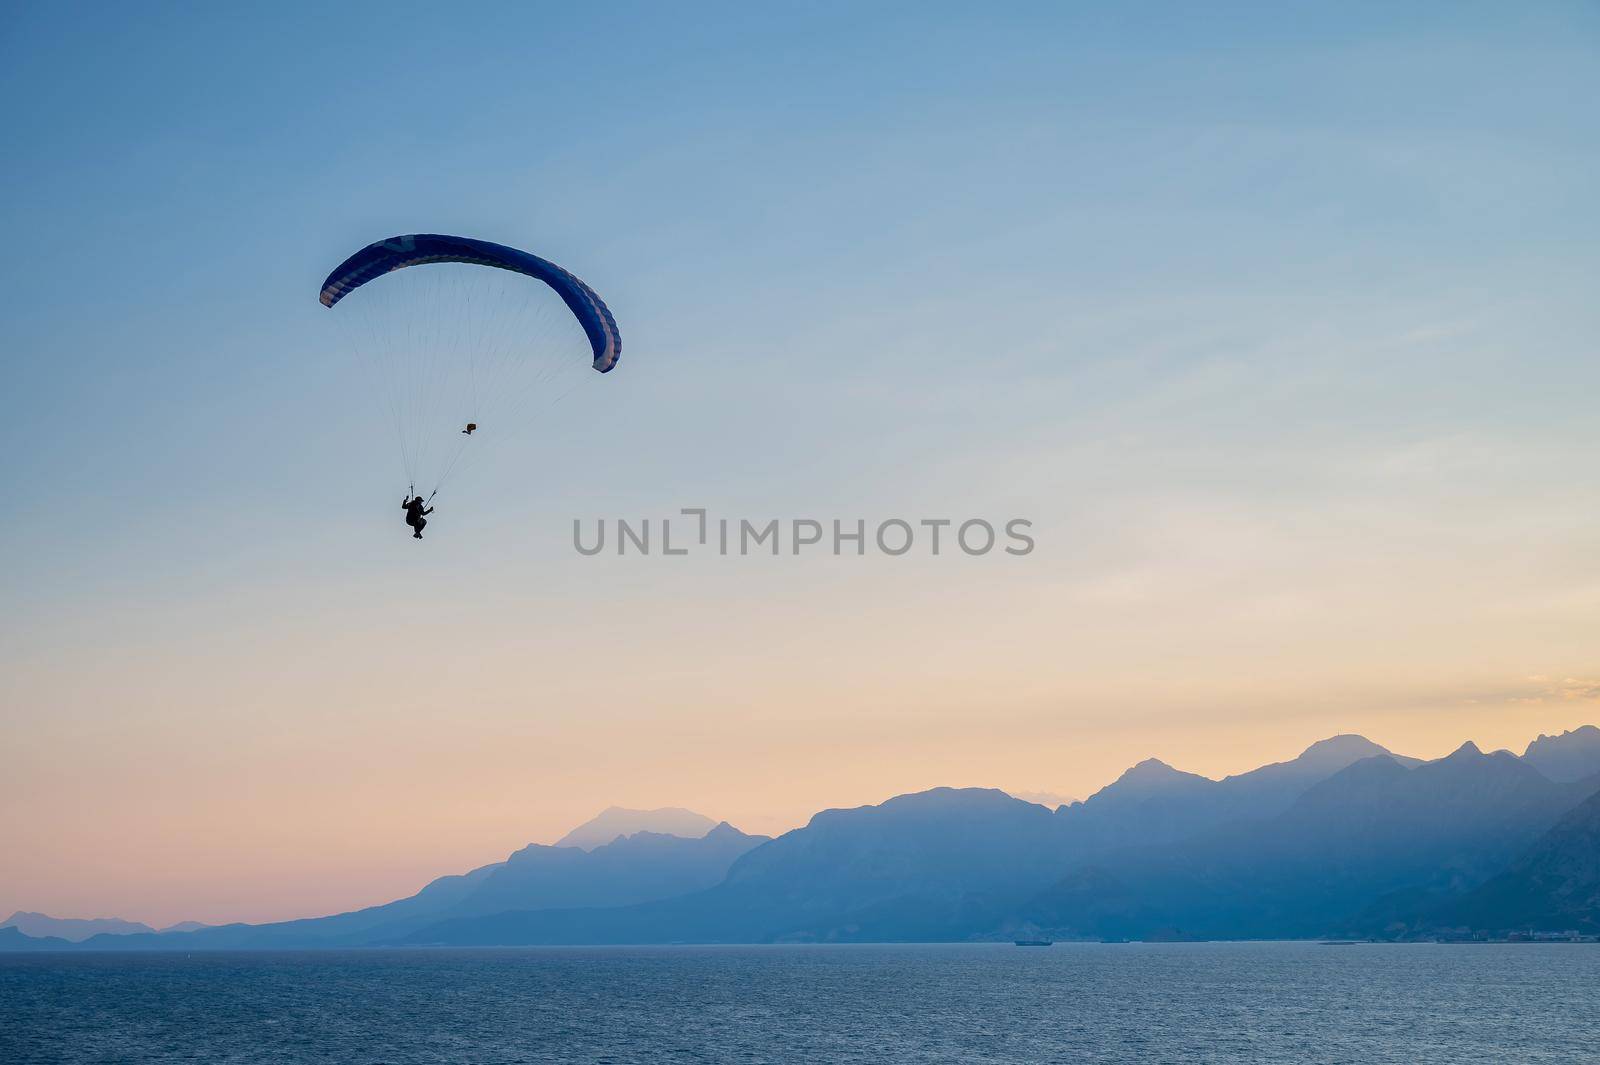 Silhouette of a man on a paraglider flying over the sea at sunset